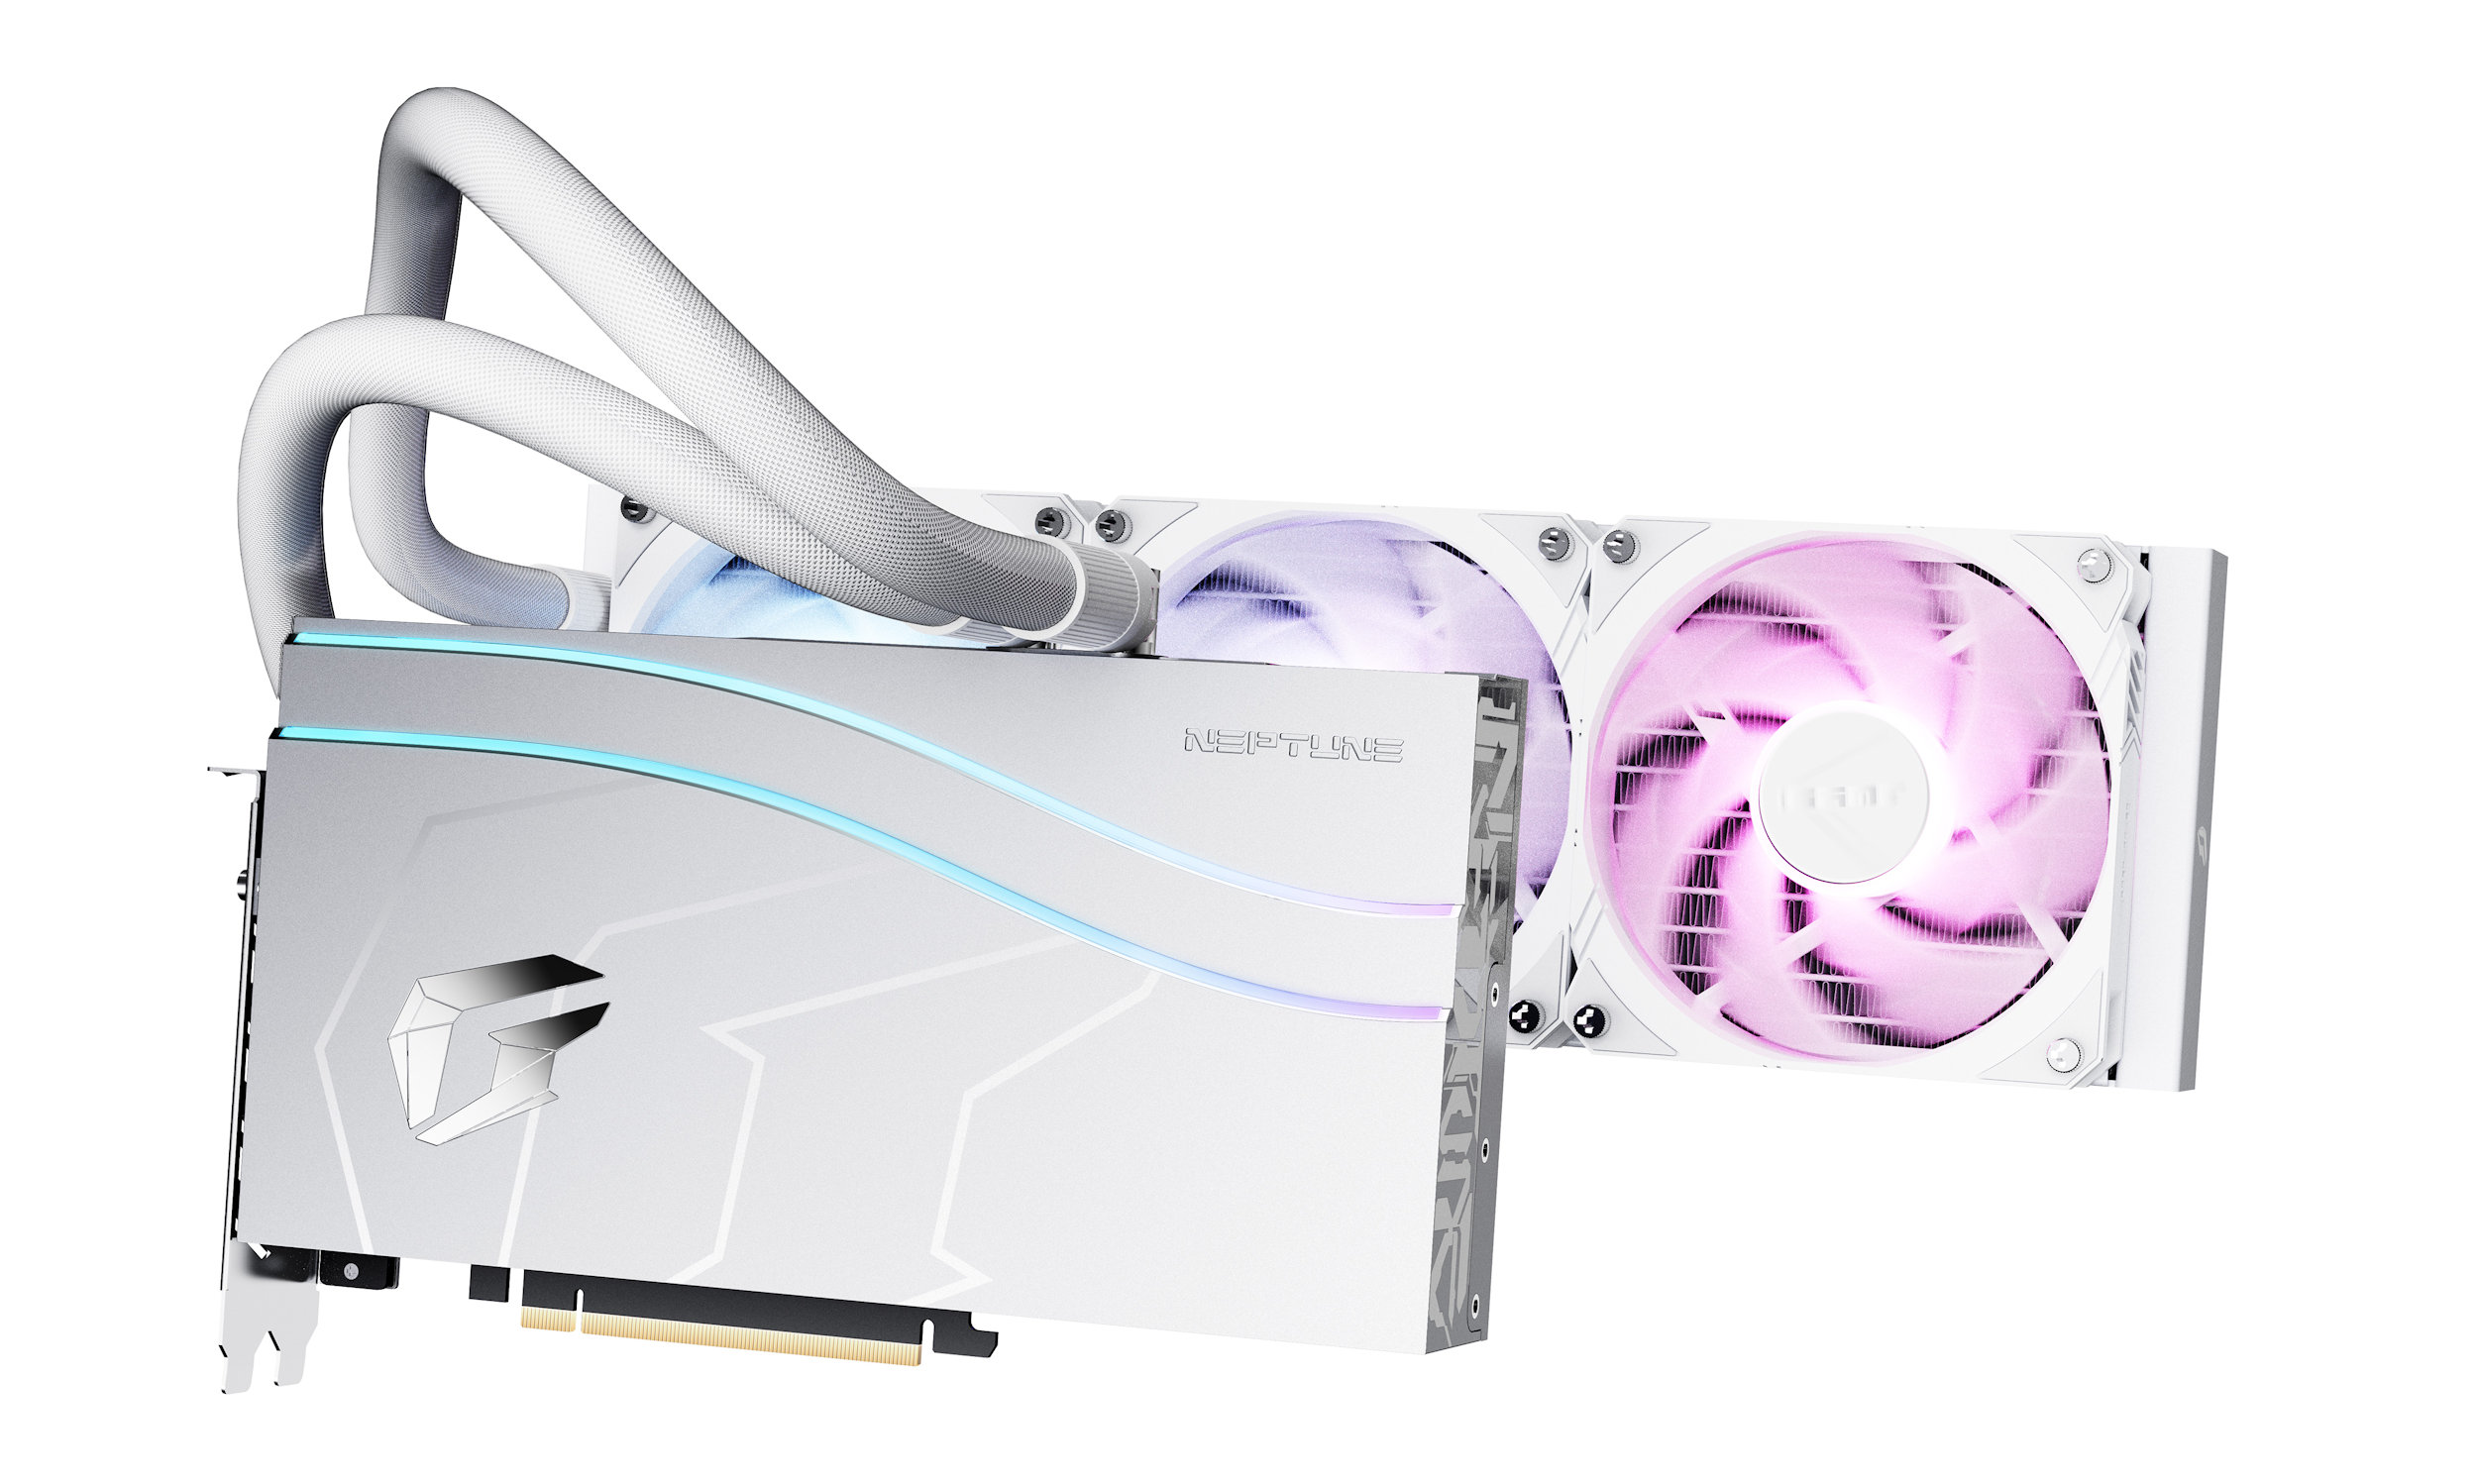 Gorgeous RTX 4090 models are popping up – but I’m worried about the Pink Tax